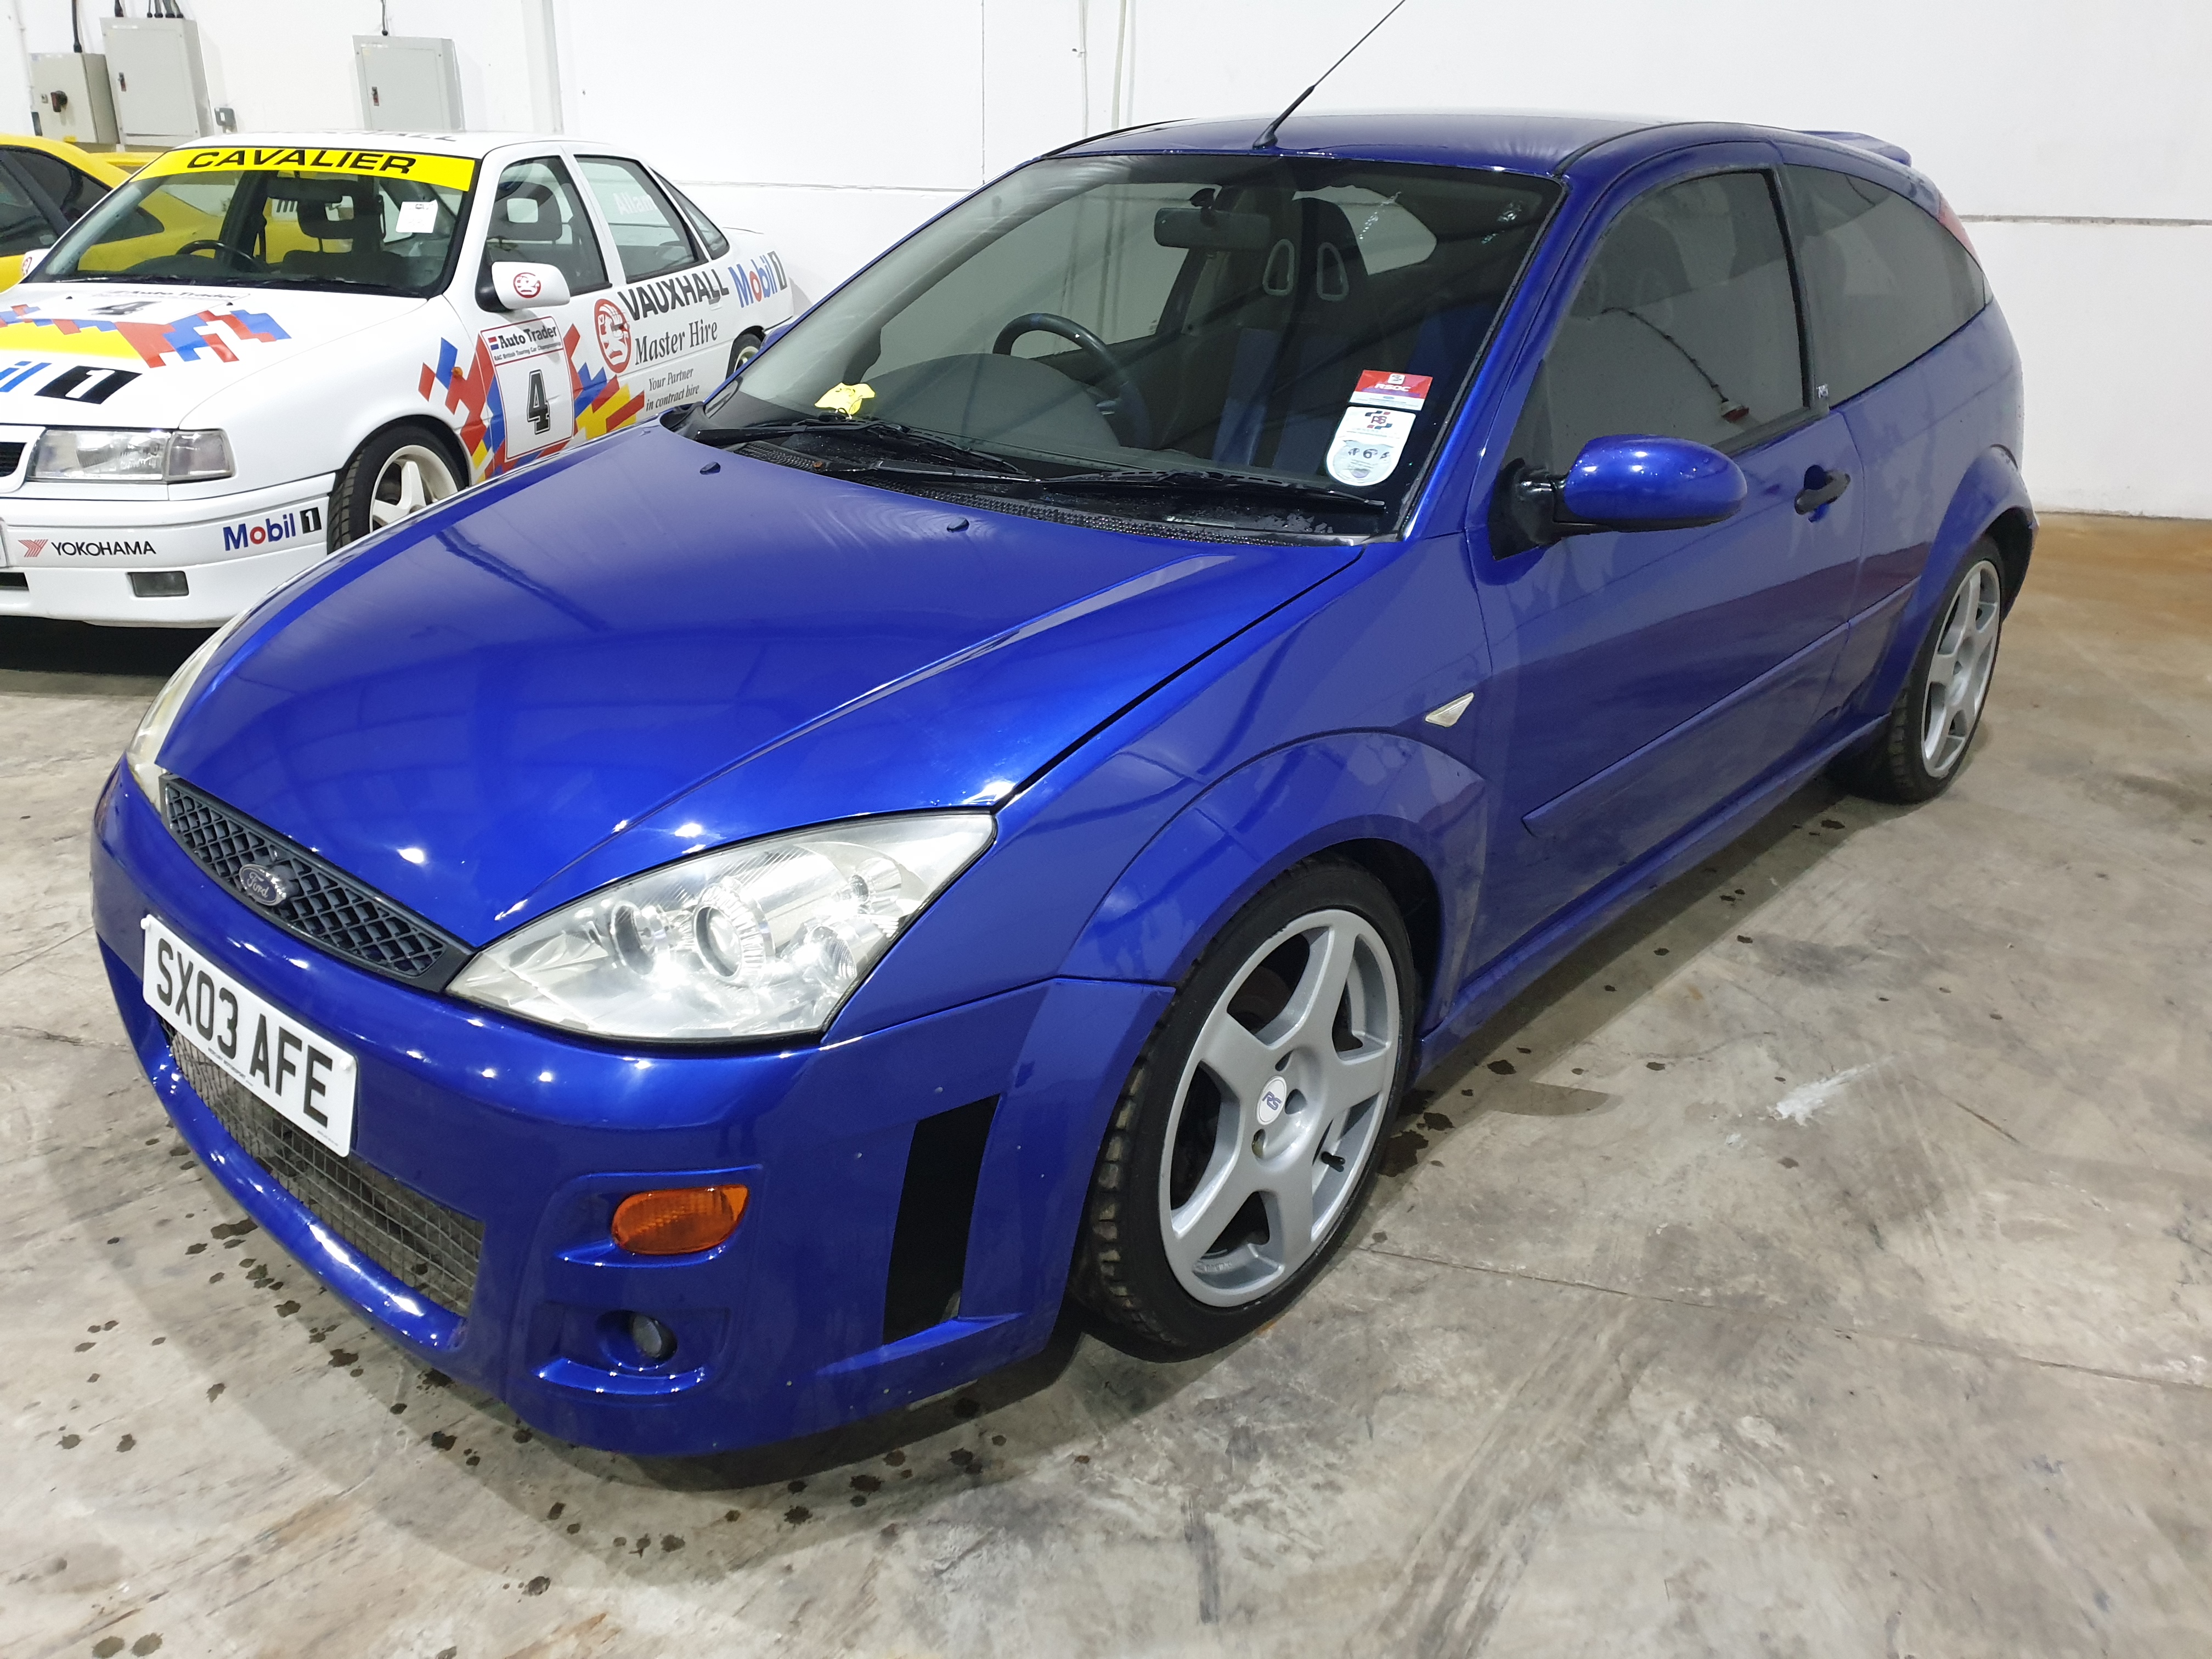 Ford Focus RS Mk1 - Image 7 of 13